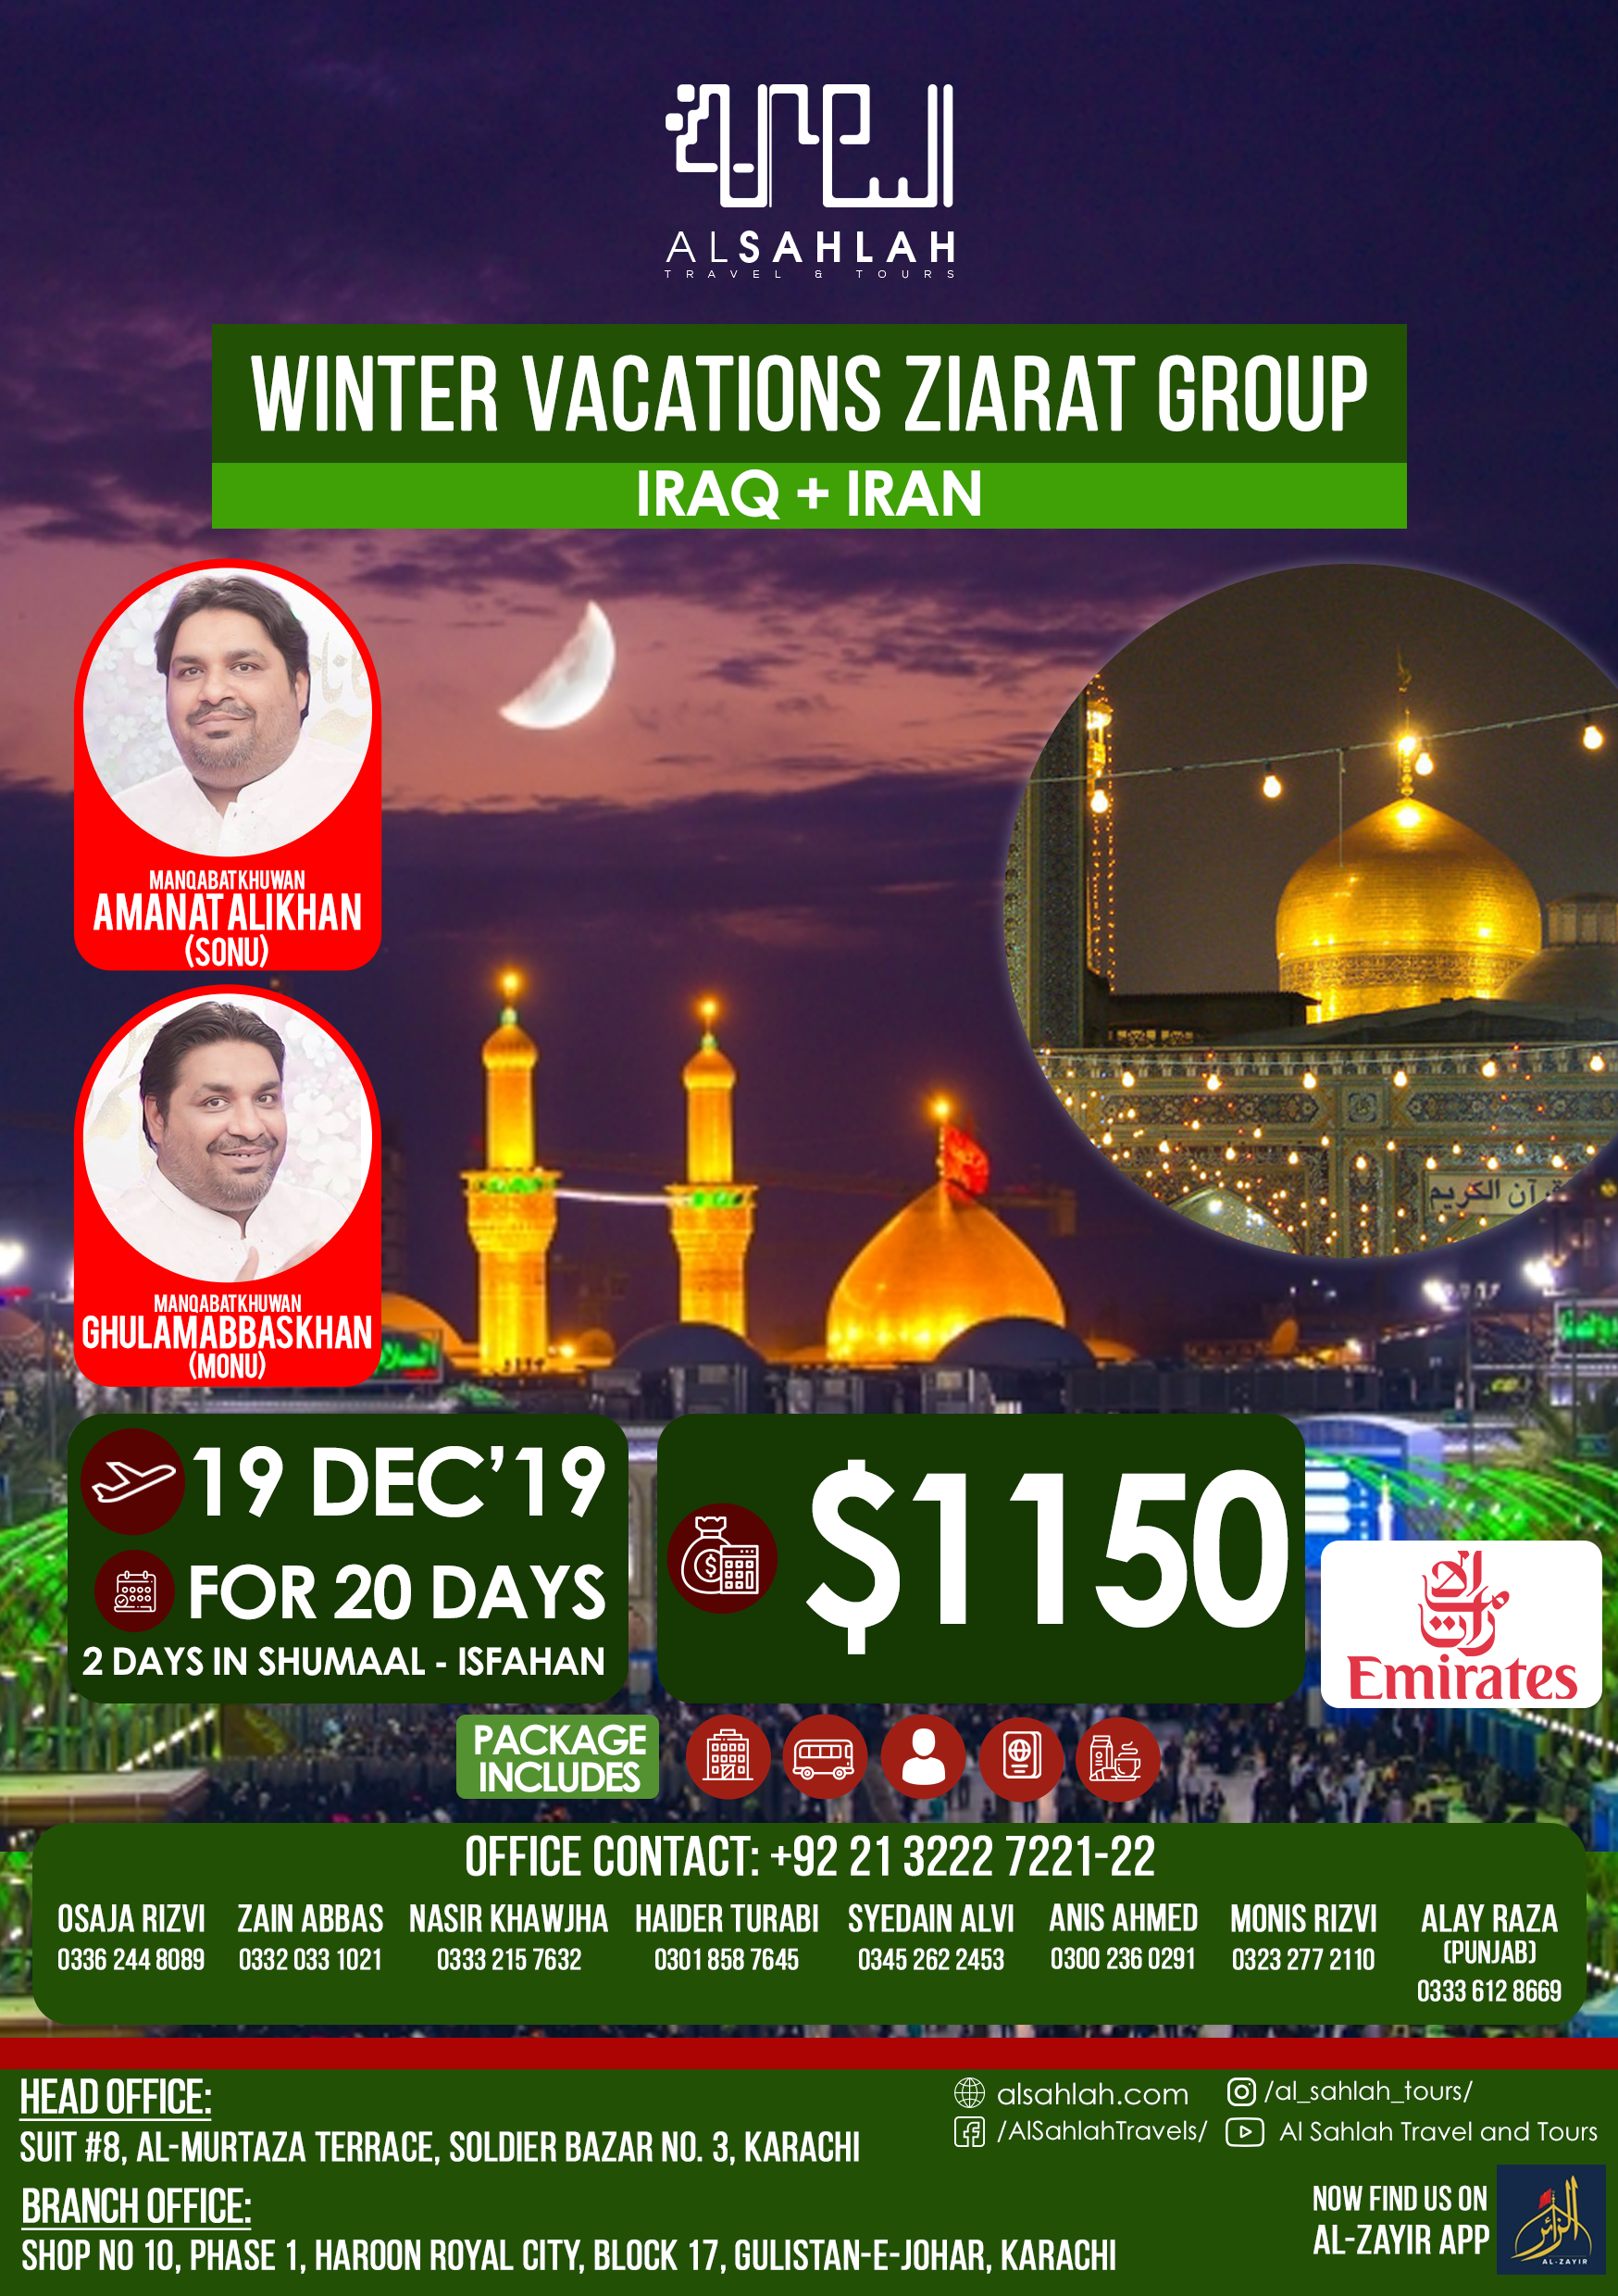 Winter Vacation Ziarat group/package for Iraq and Iran